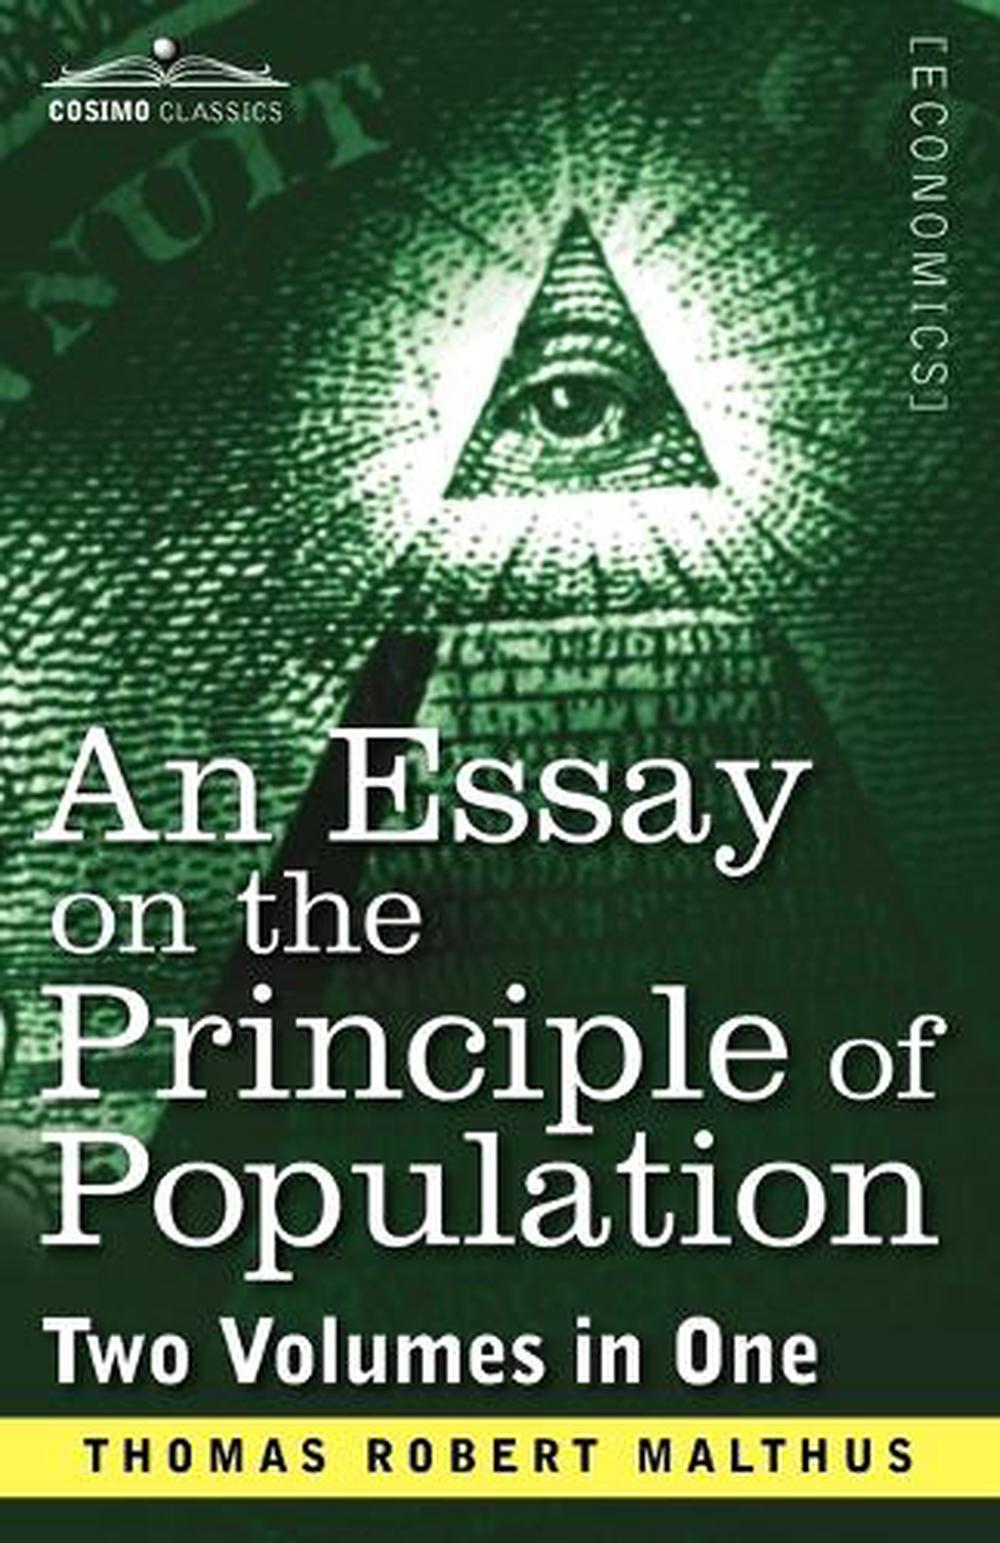 an essay of the principle of population